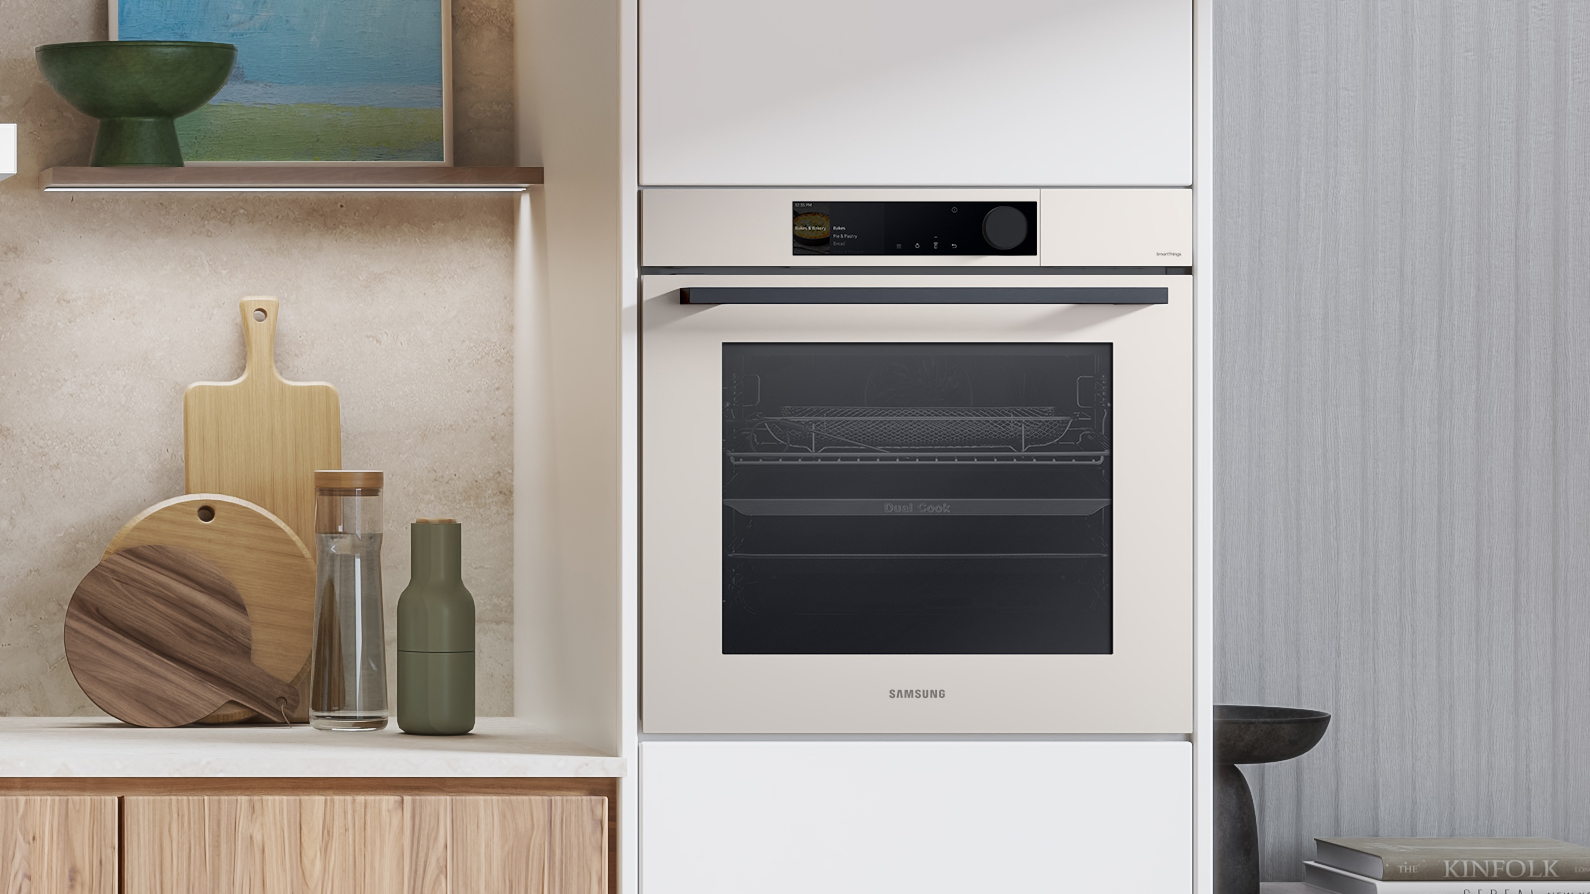 A Bespoke oven that adds a touch of sophistication and blends into any kitchen style.